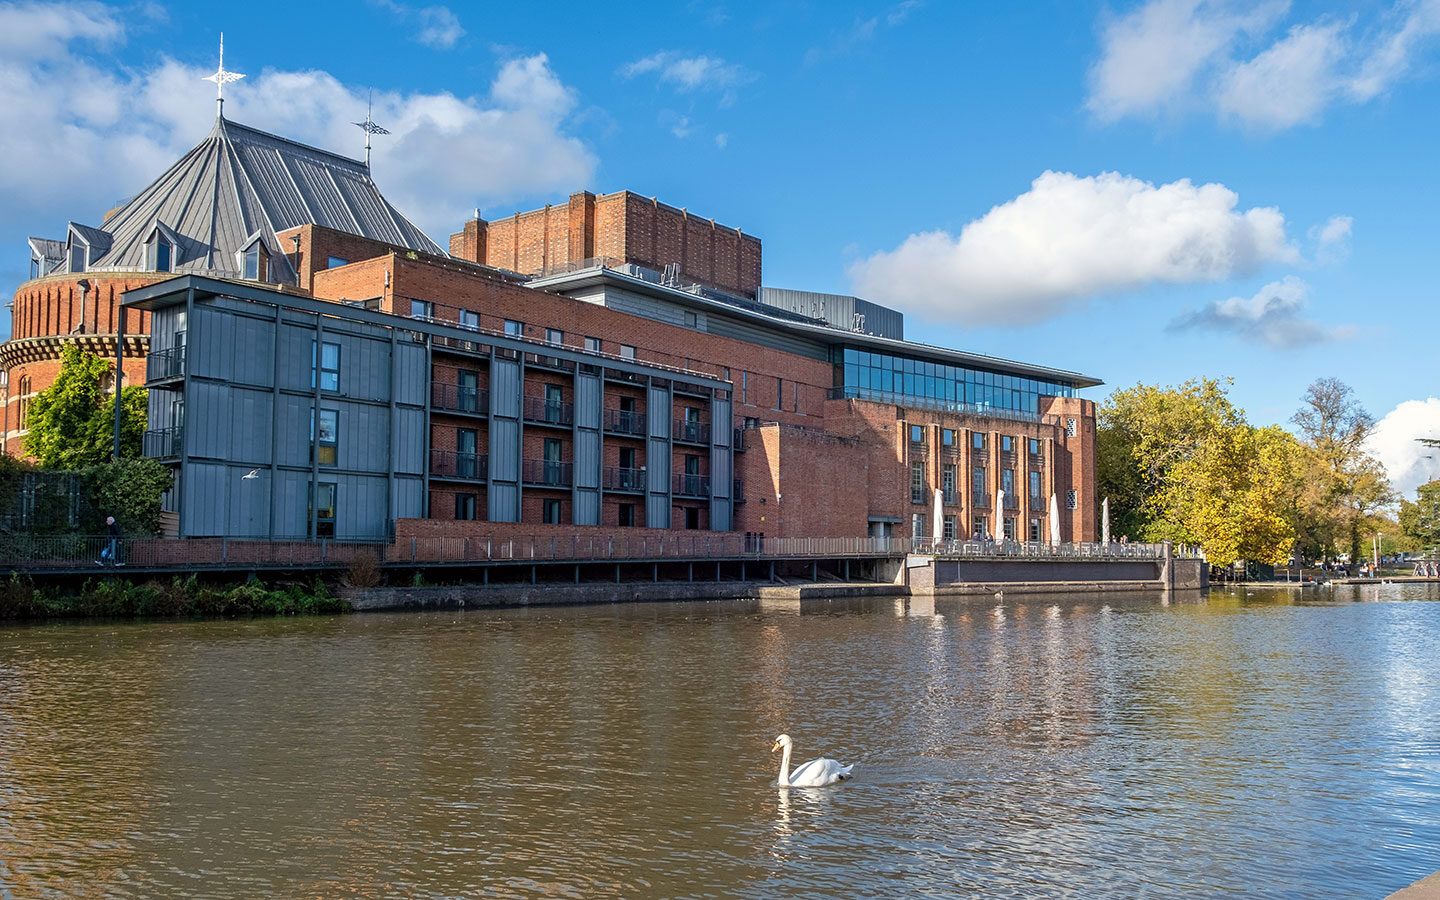 The RSC theatre and River Avon in Stratford-upon-Avon